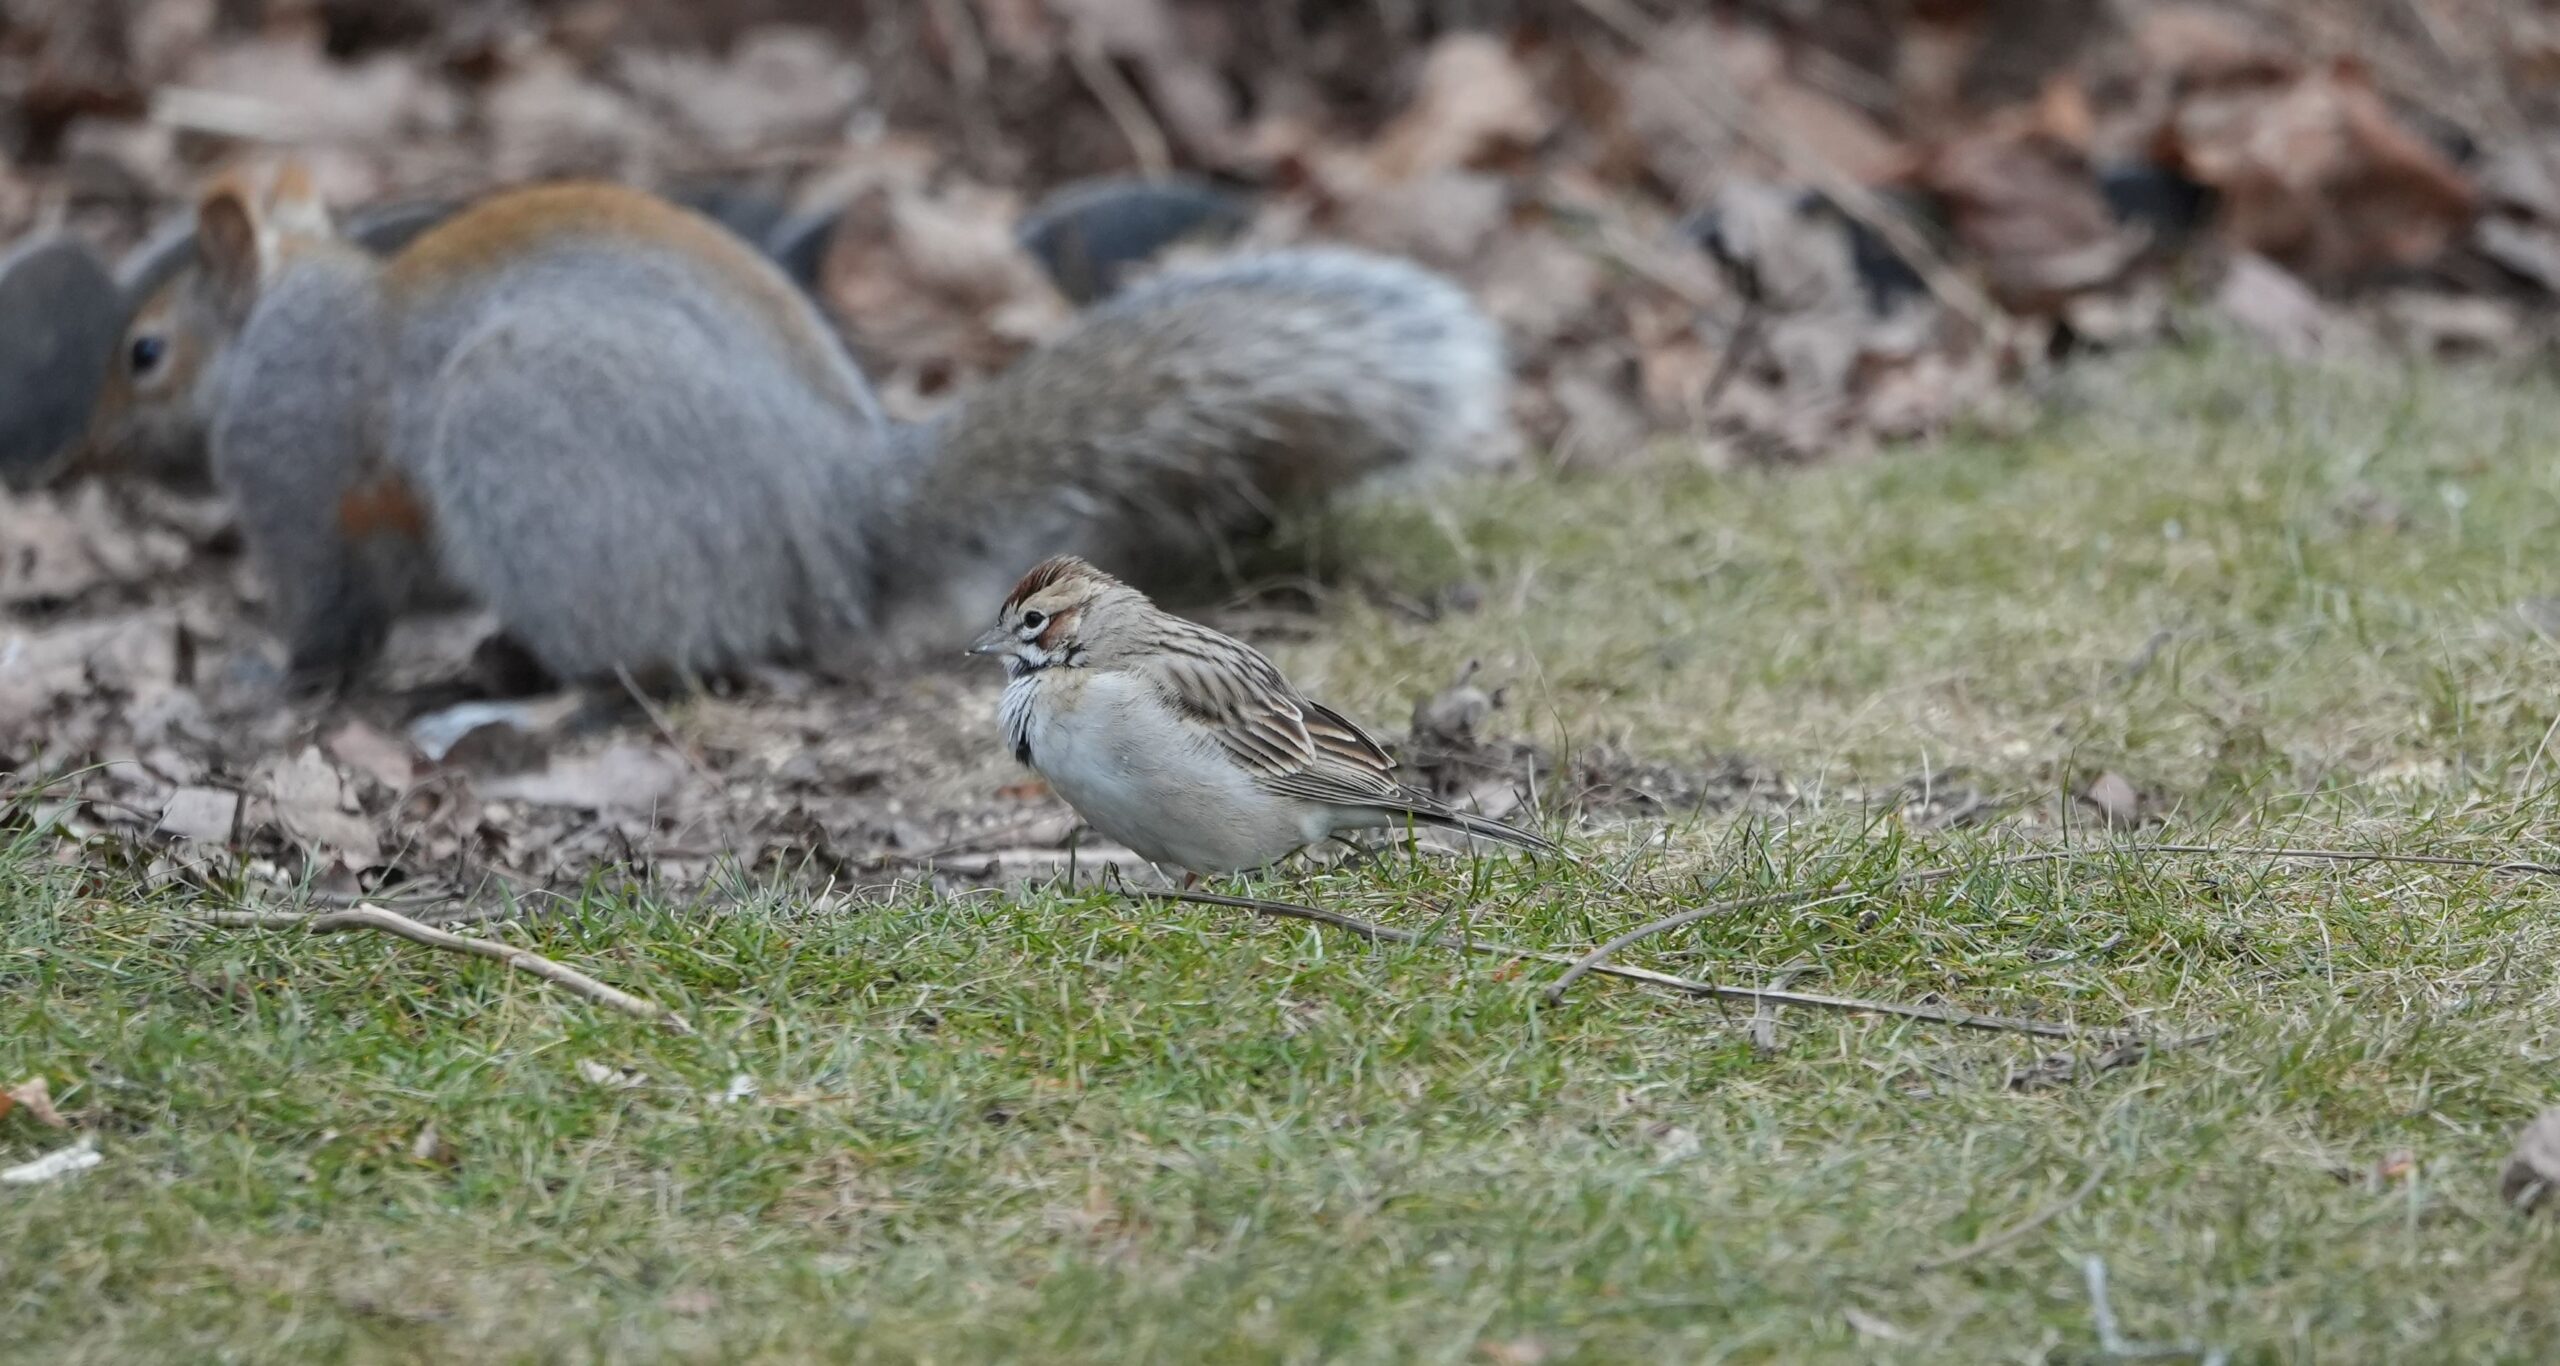 Lark Sparrow on a residential lawn with a grey squirrel in the background by Peter Waycik